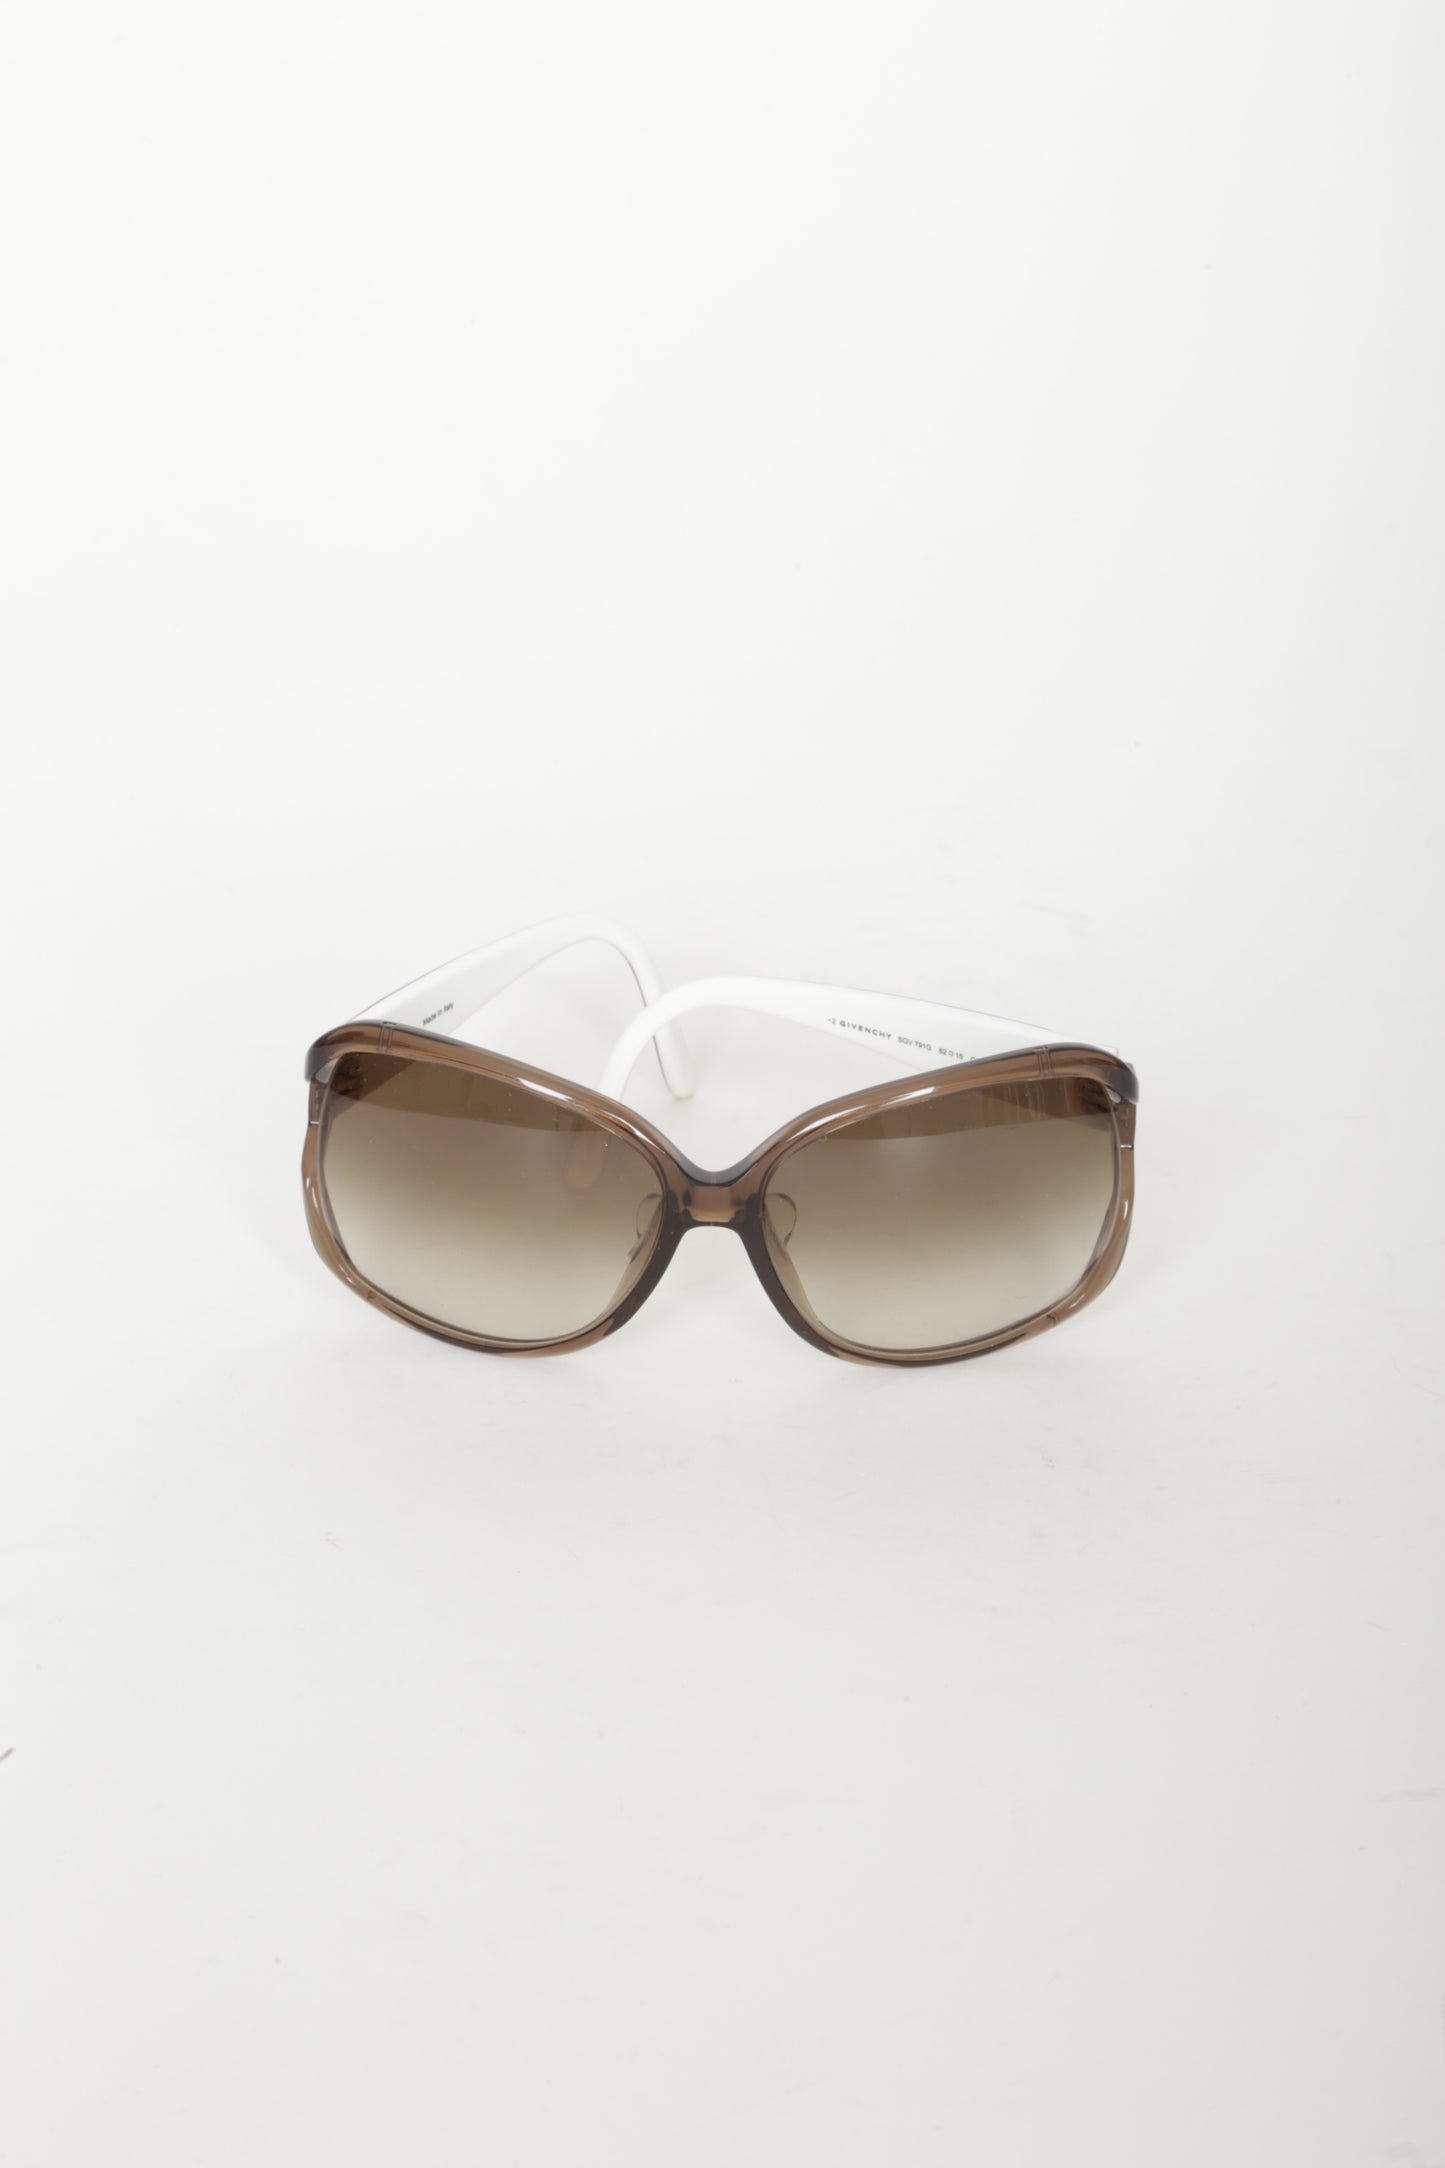 Givenchy Womens Brown Sunglasses Size O/S